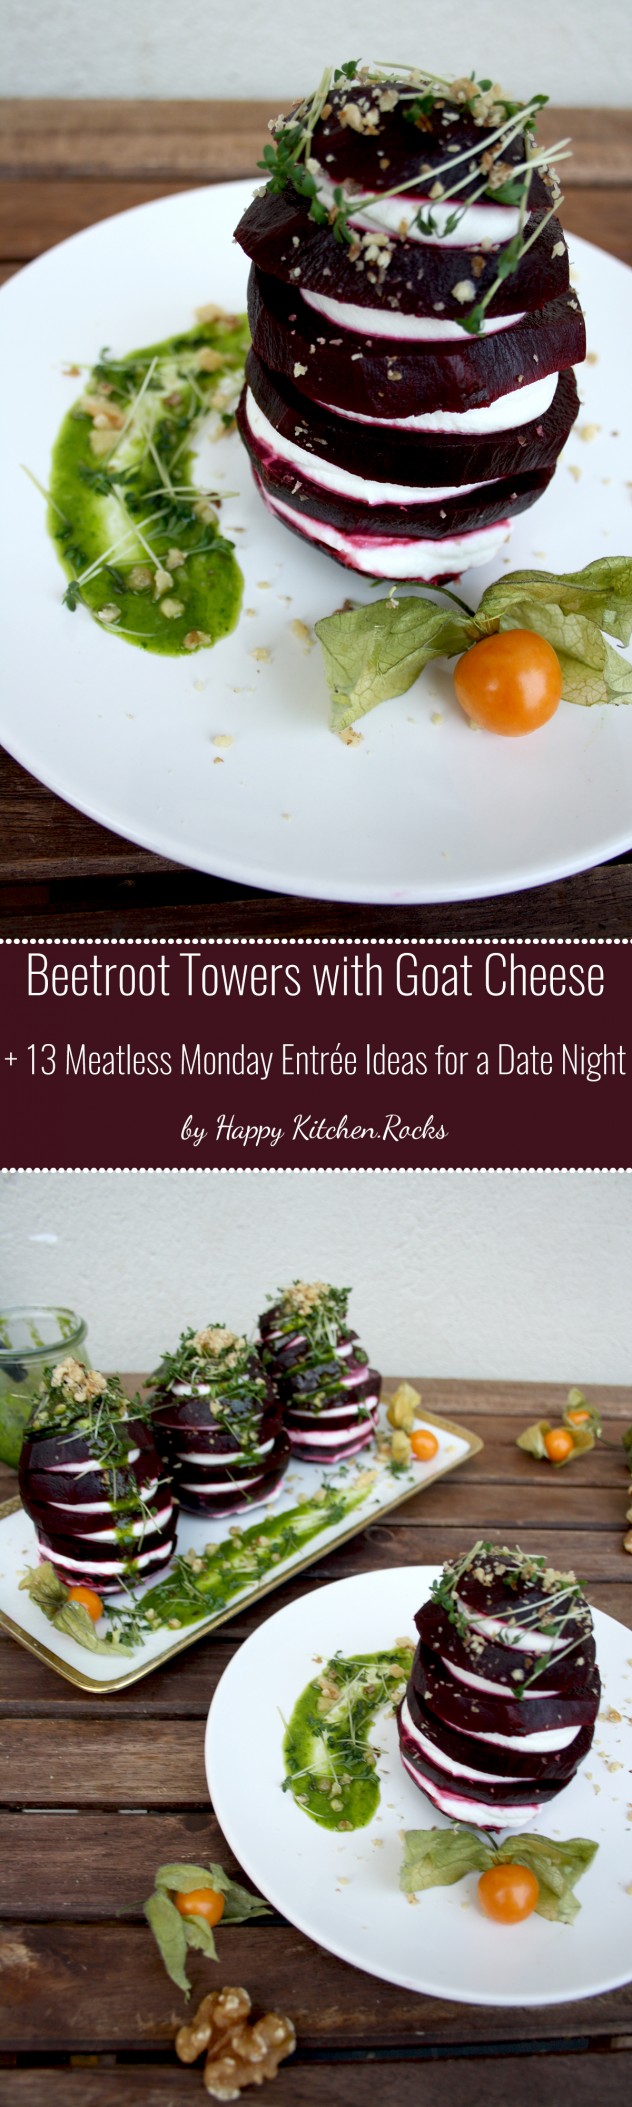 Beet Towers with Goat Cheese Pinterest Image